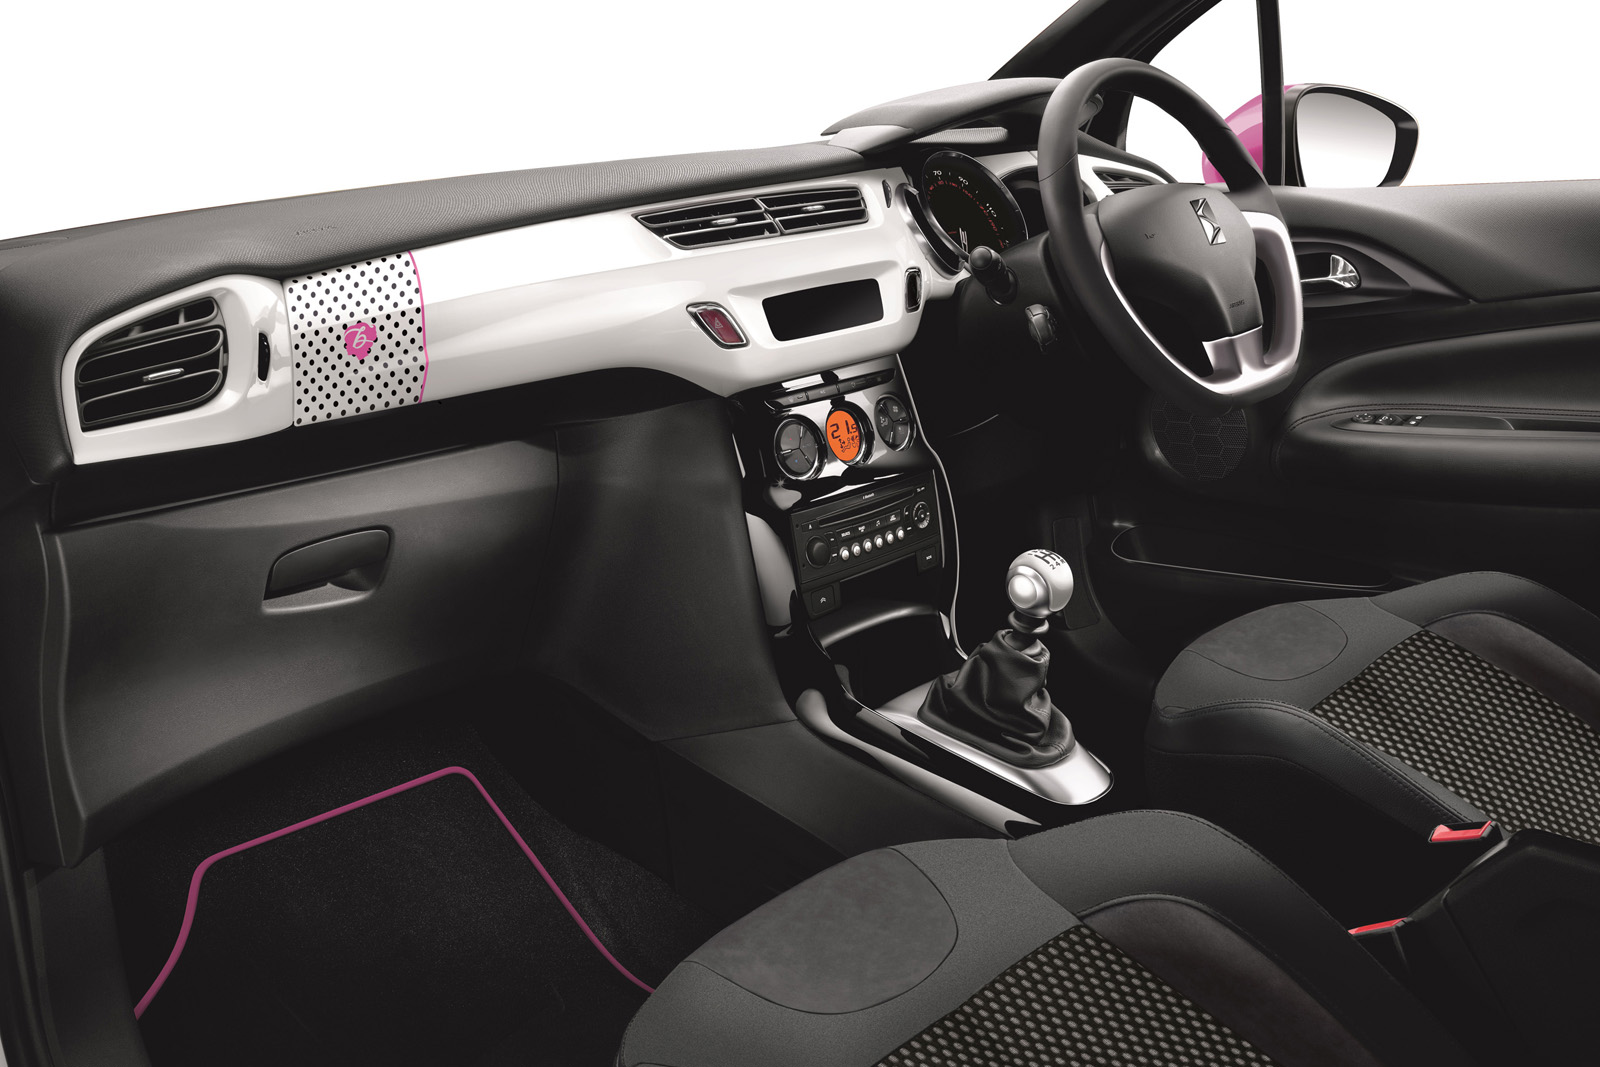 DS3 Cabrio DStyle by Benefit is Citroen's Fourth Cosmetic-Themed Special